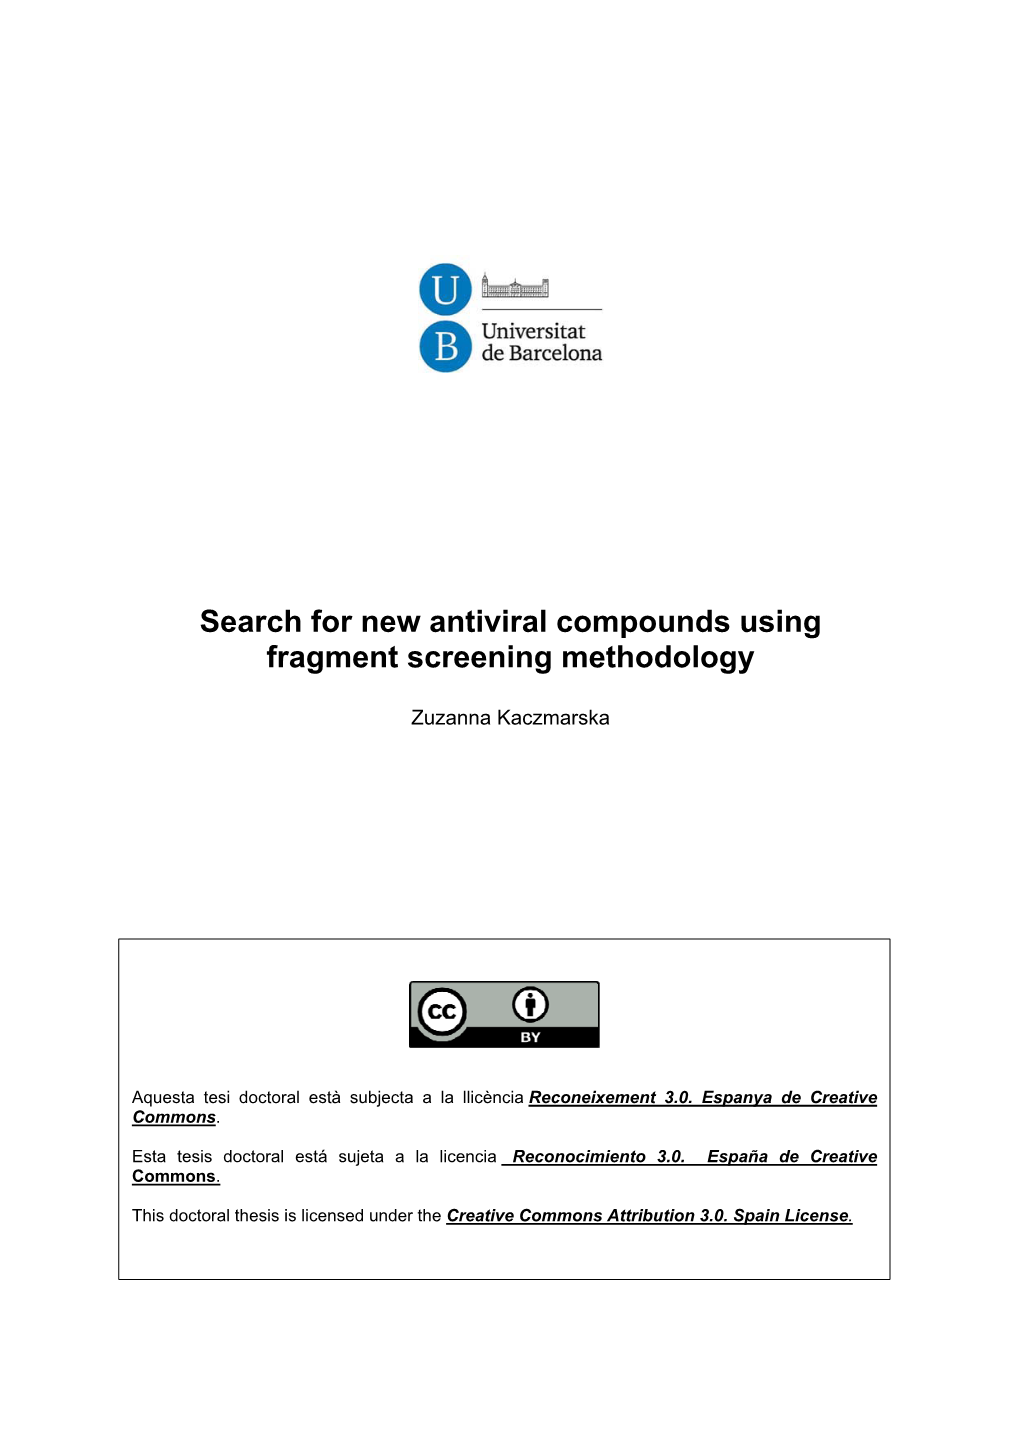 Search for New Antiviral Compounds Using Fragment Screening Methodology